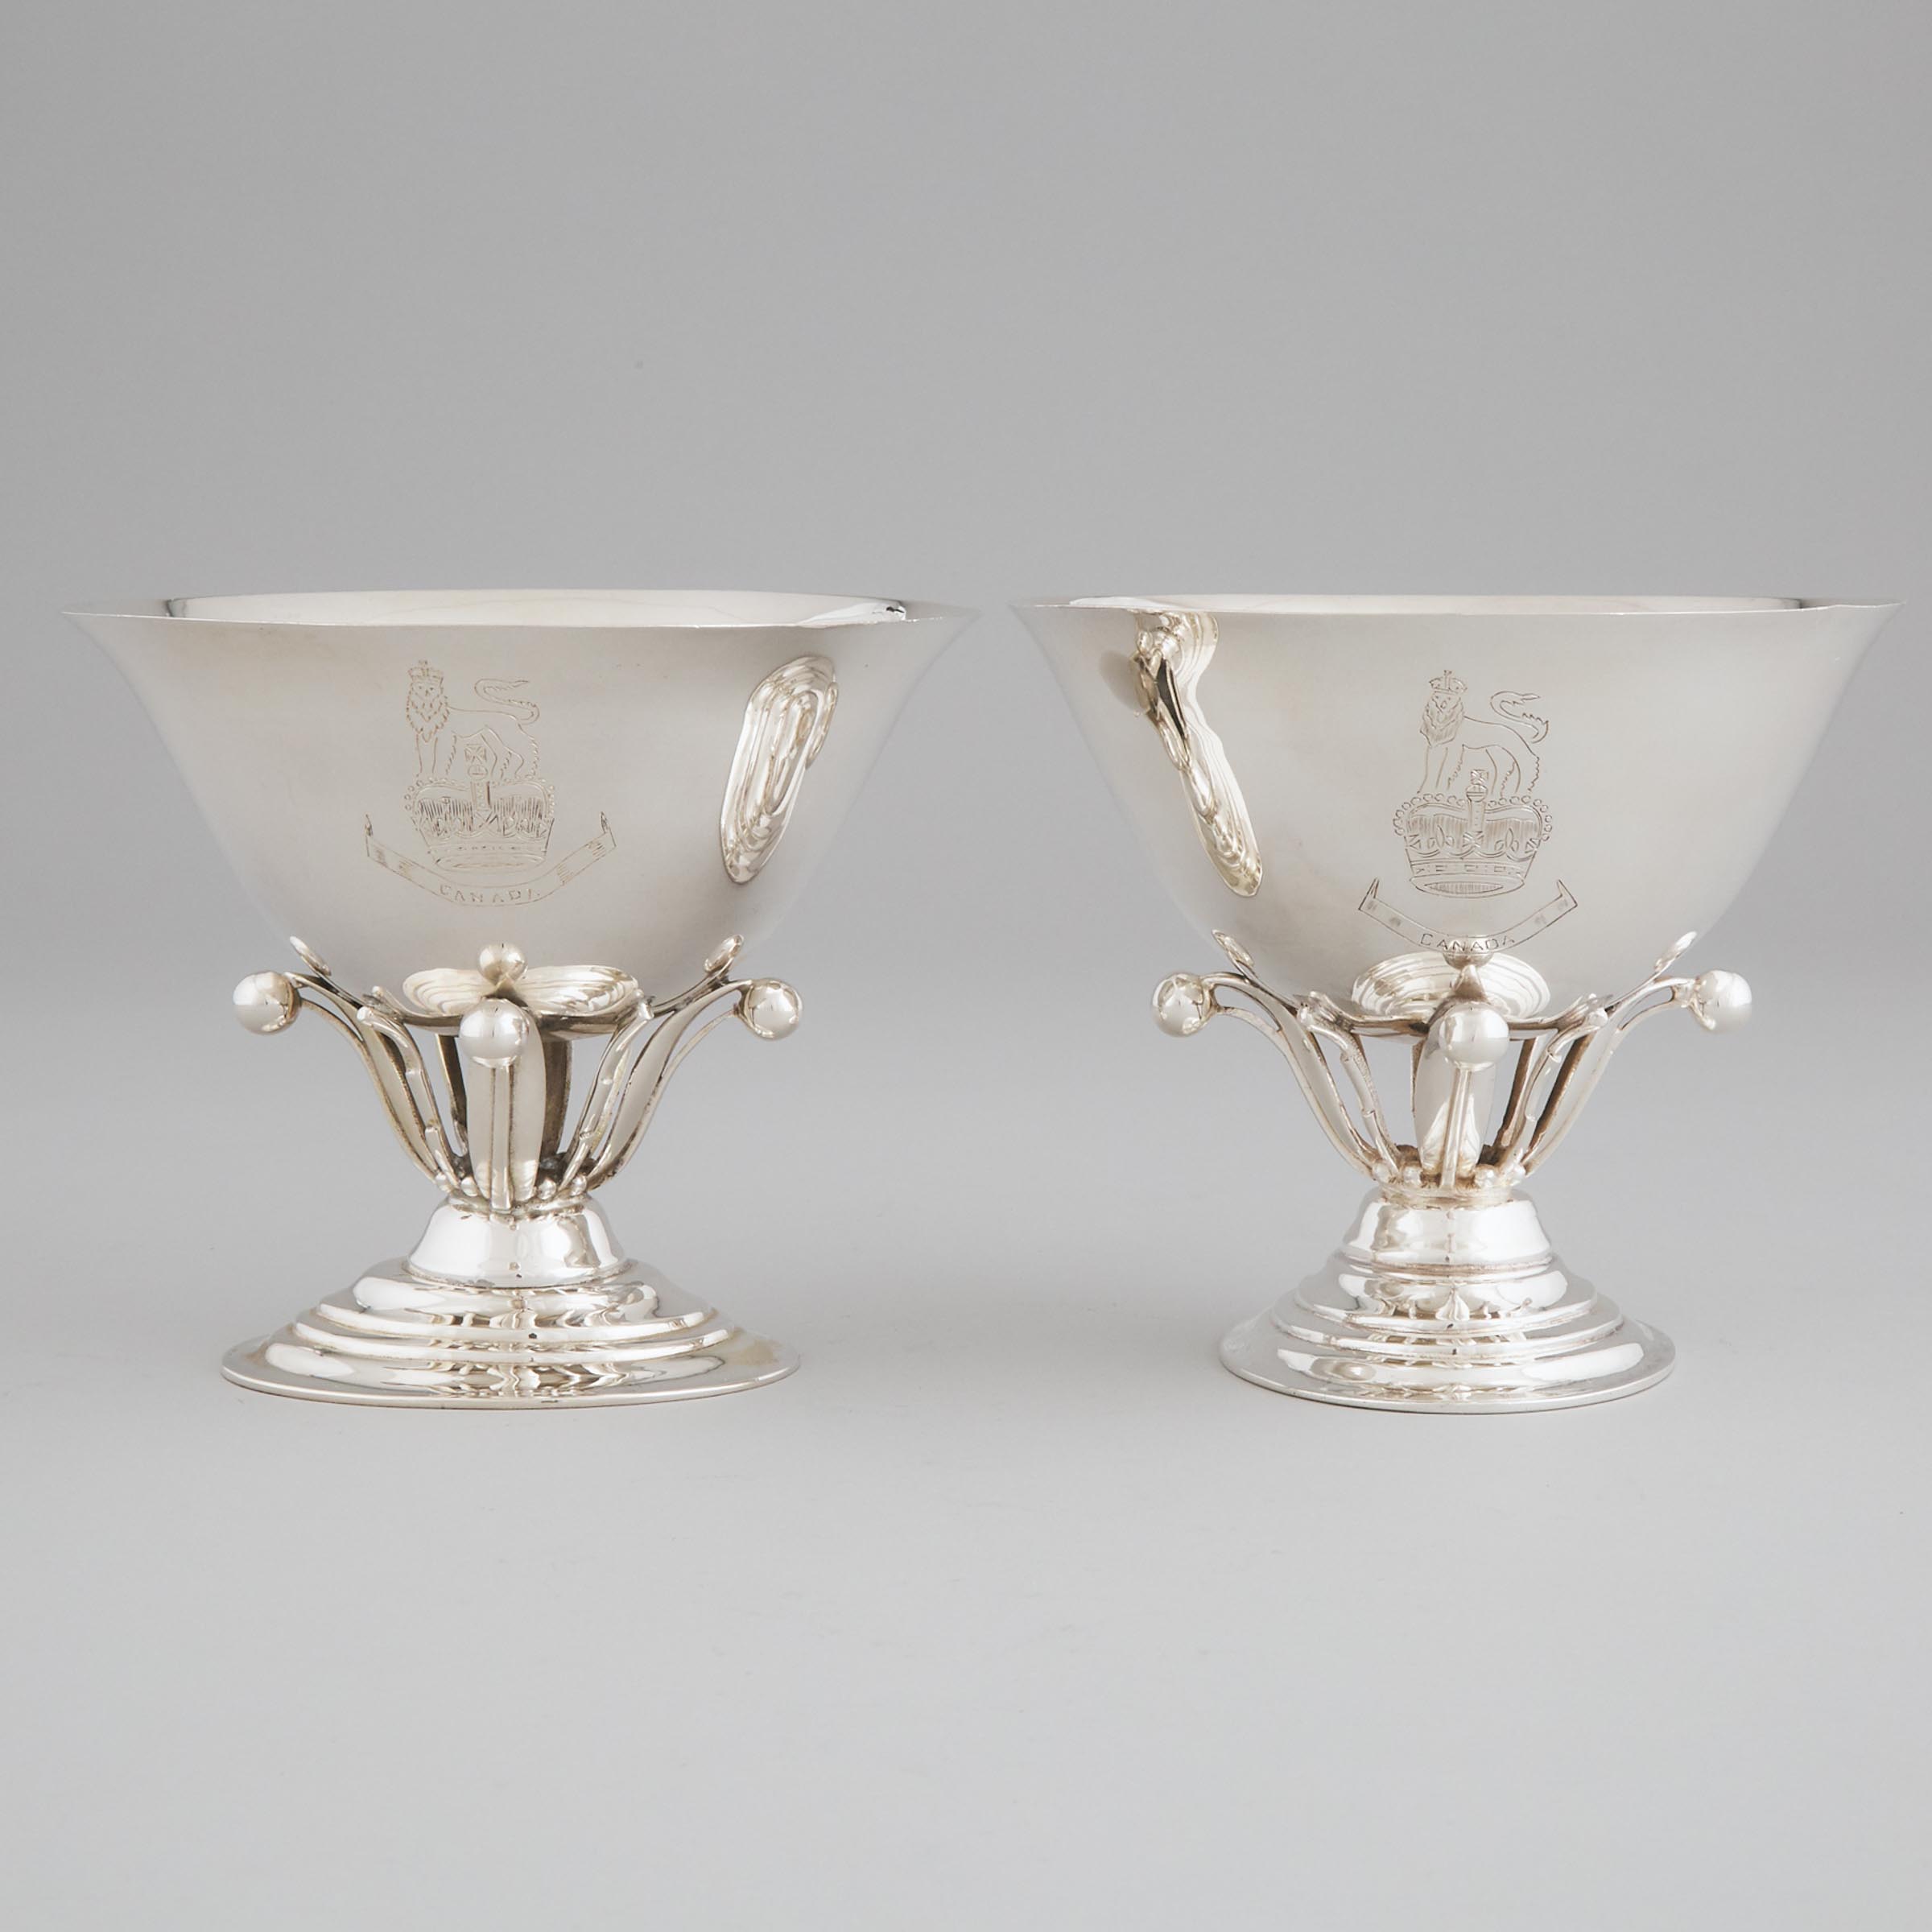 Pair of Indian Silver Pedestal-Footed Comports, 20th century